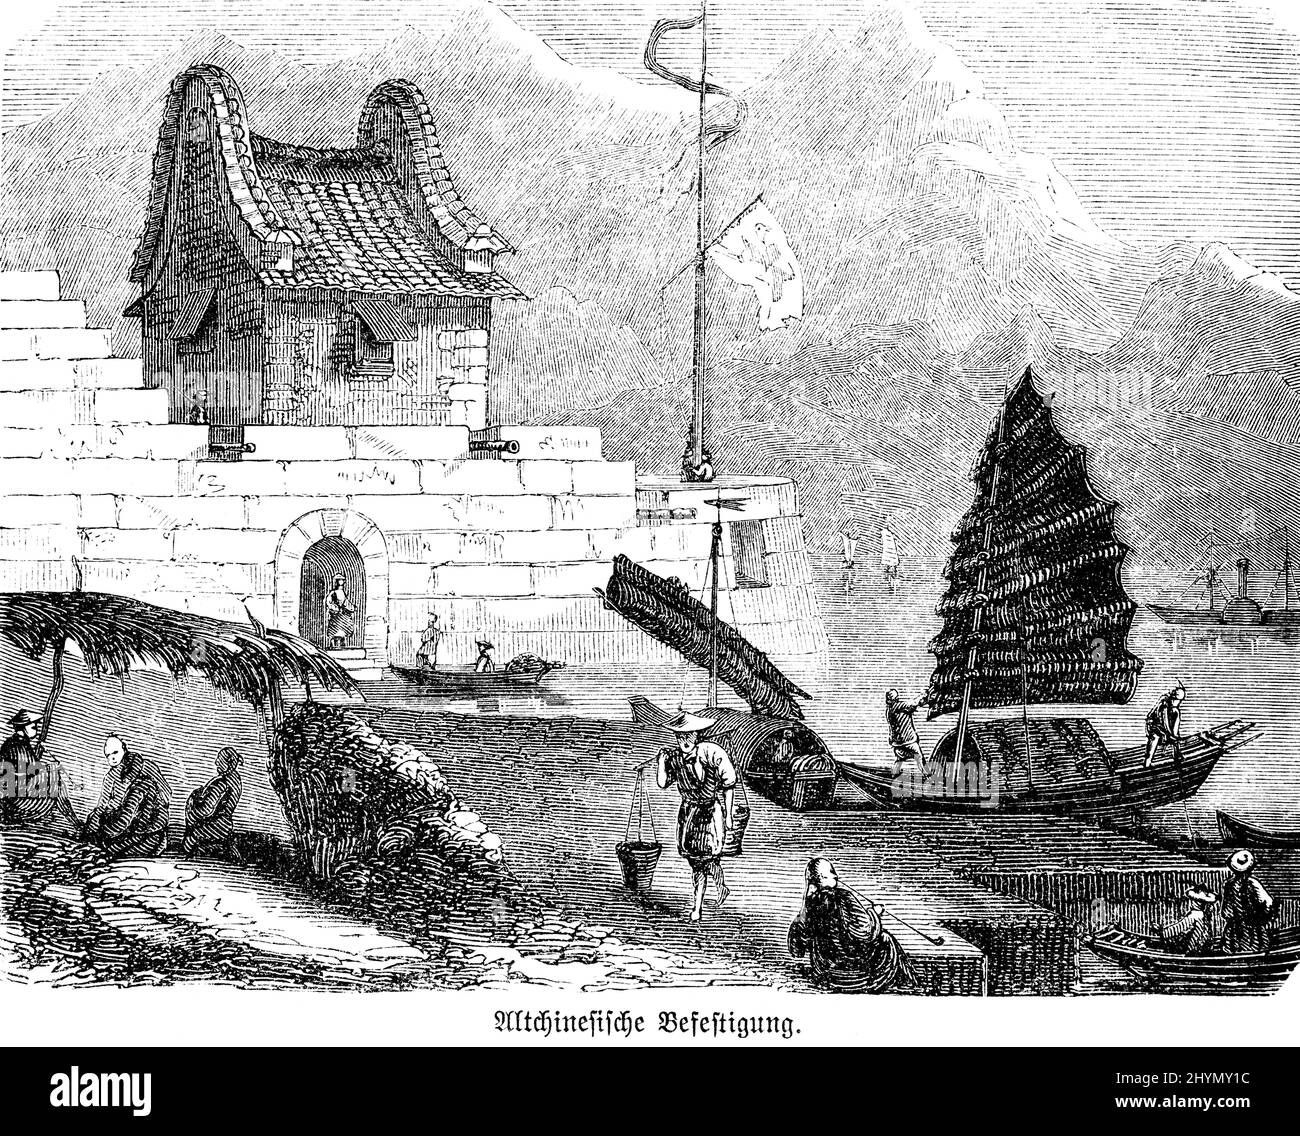 Ancient Chinese castle complex, wall, boats, sails, mountains, flags, small, harbour, people, trade, river, historical illustration 1885, China Stock Photo